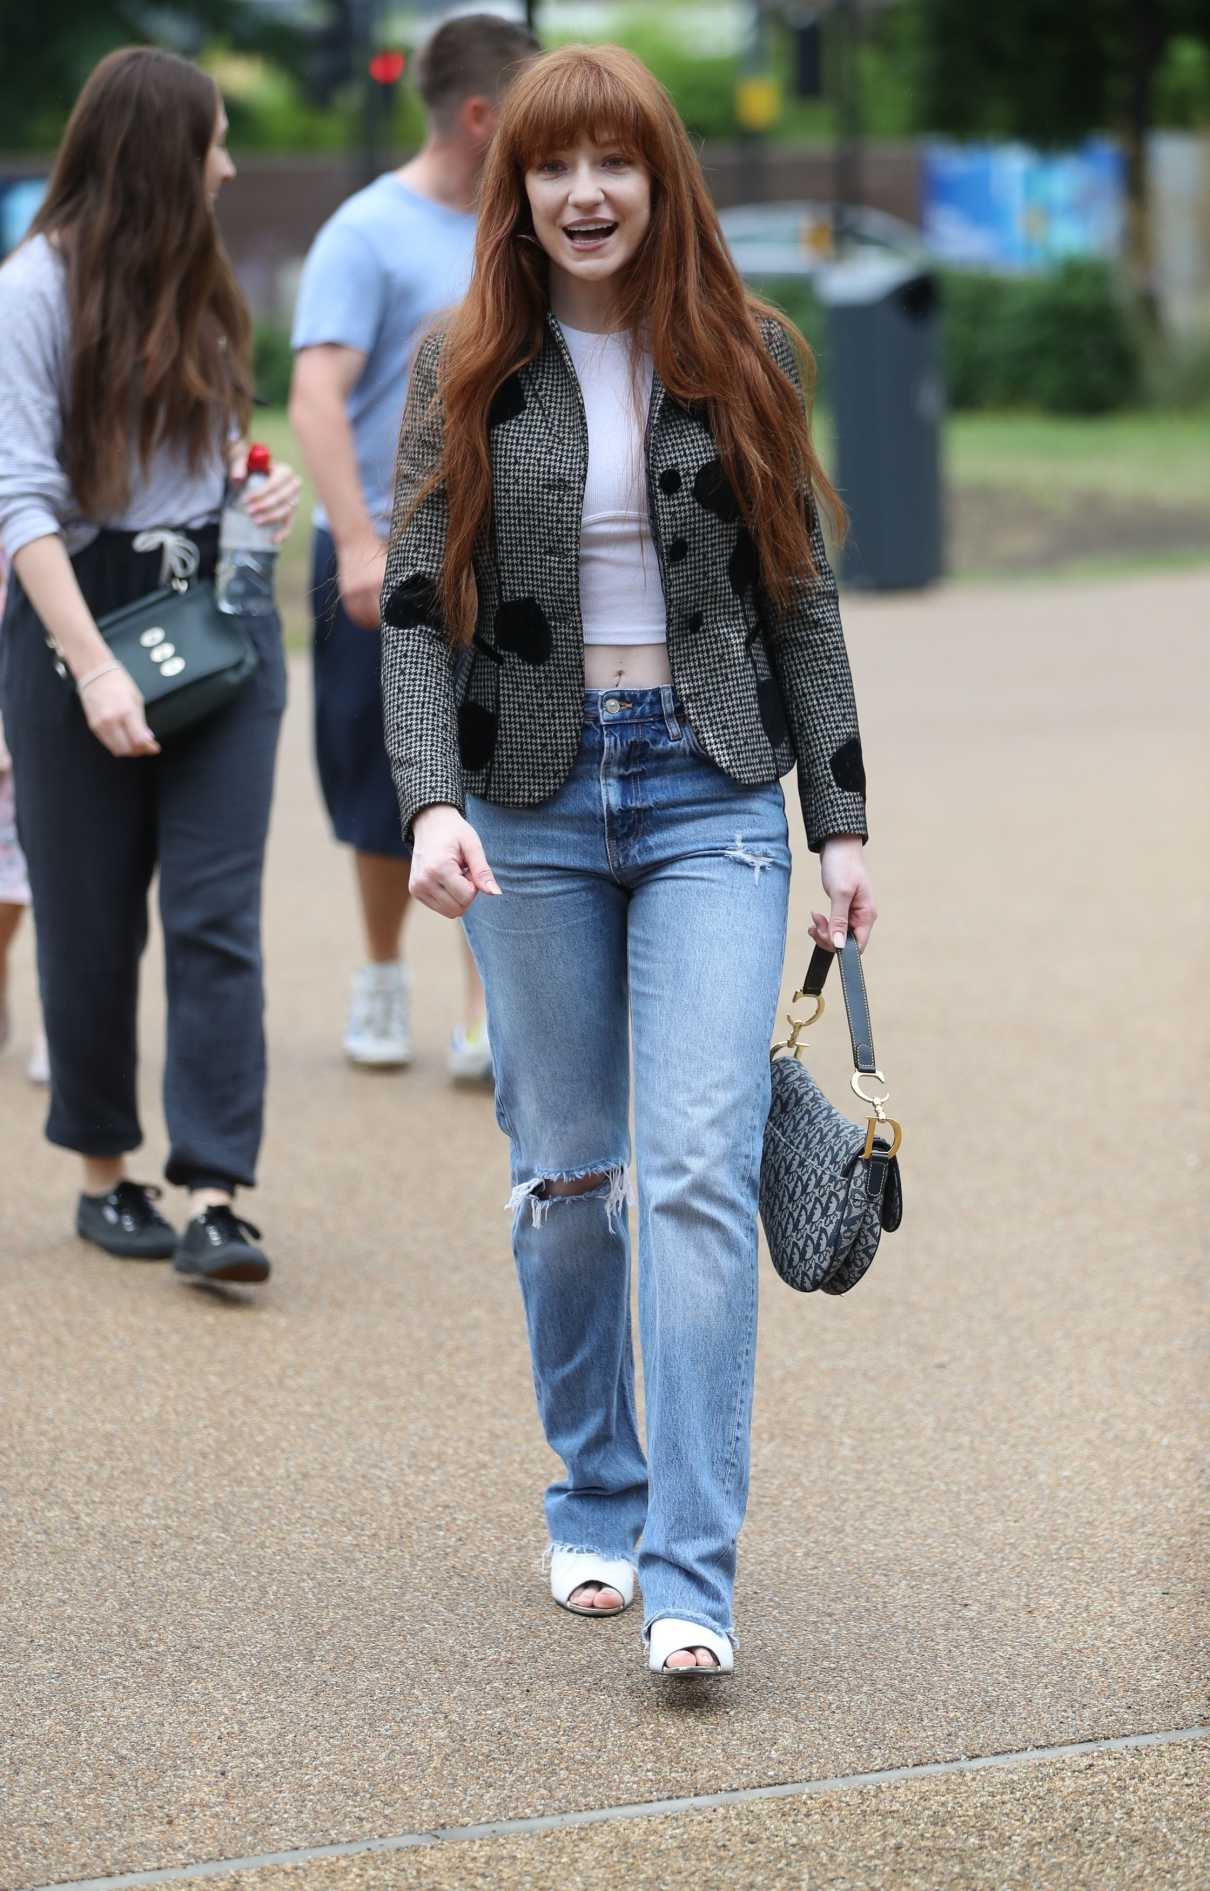 Nicola Roberts in a Blue Ripped Jeans